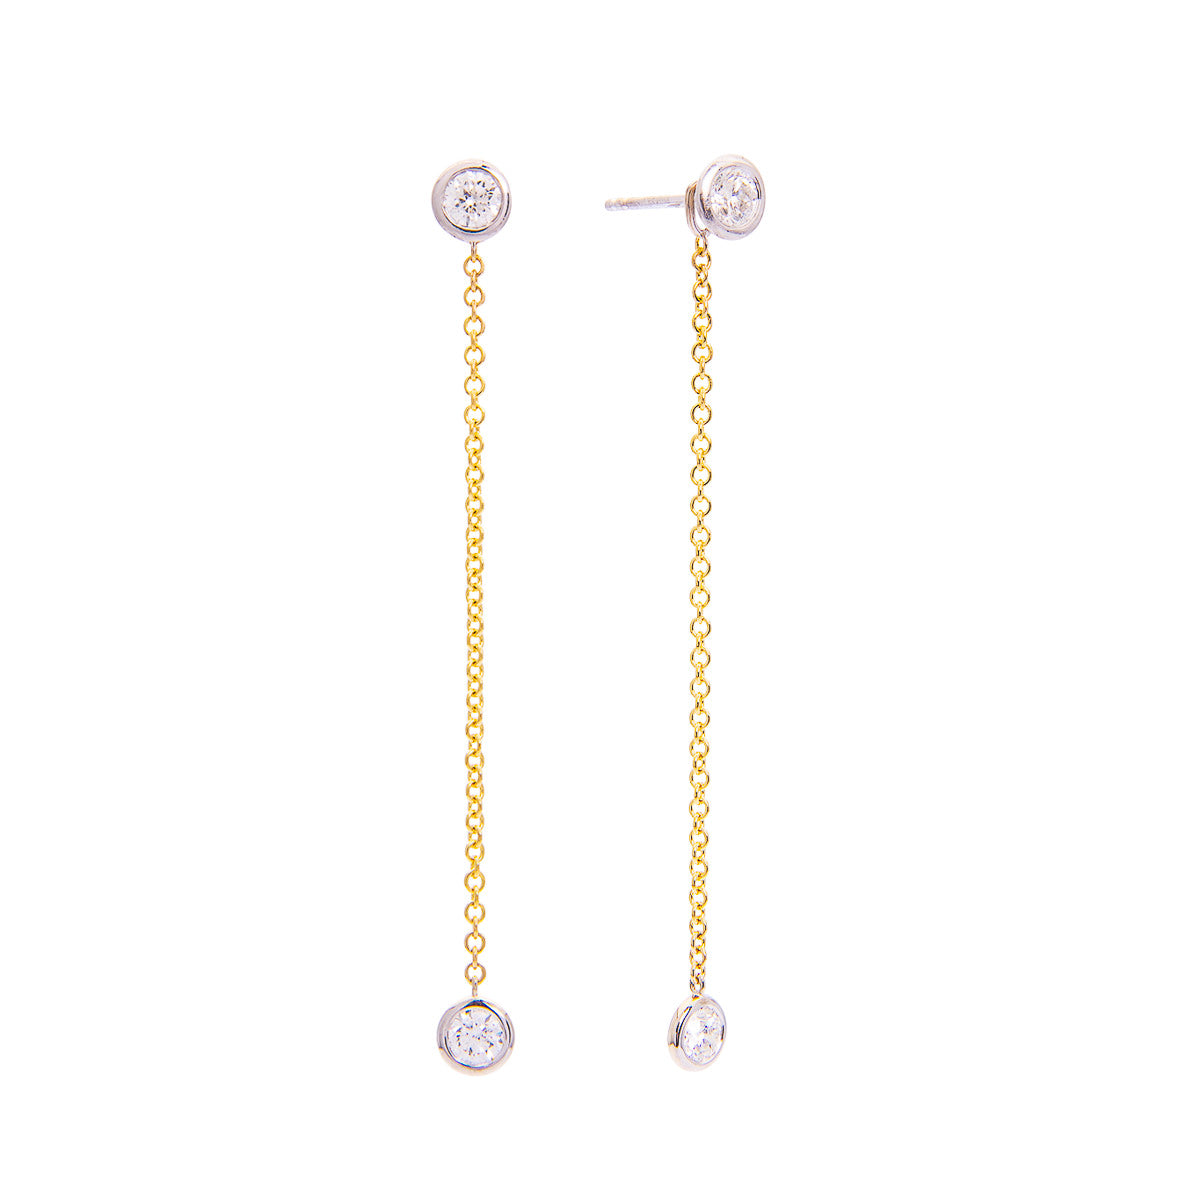 Sabel Collection 18K Yellow Gold Chain Diamond Drop Earrings